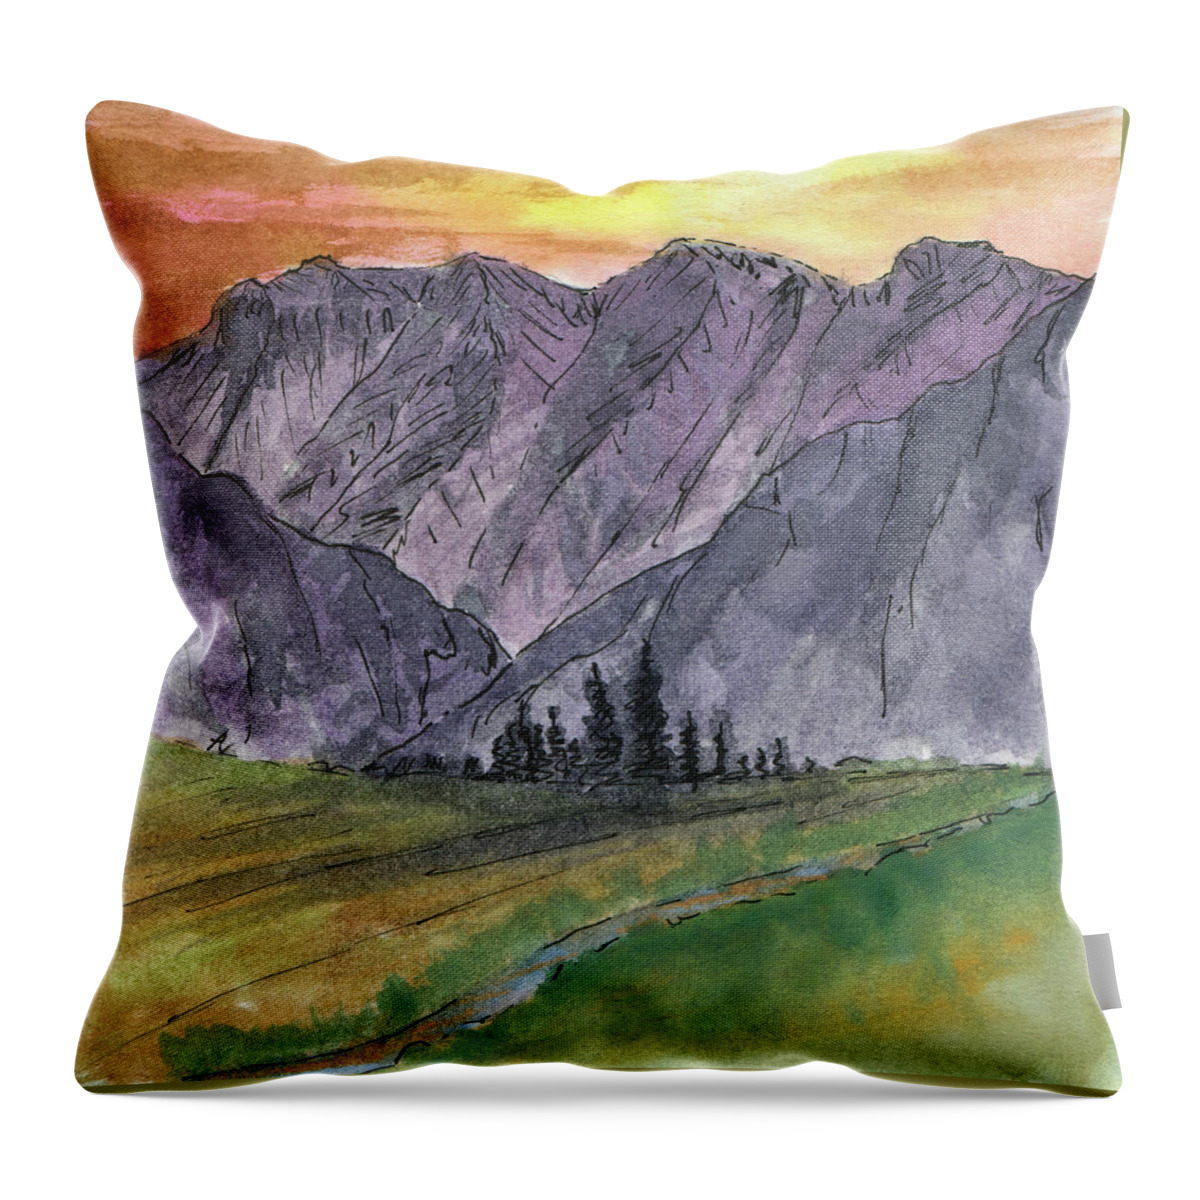 Mountains Throw Pillow featuring the painting Near Canyon Entrance by R Kyllo